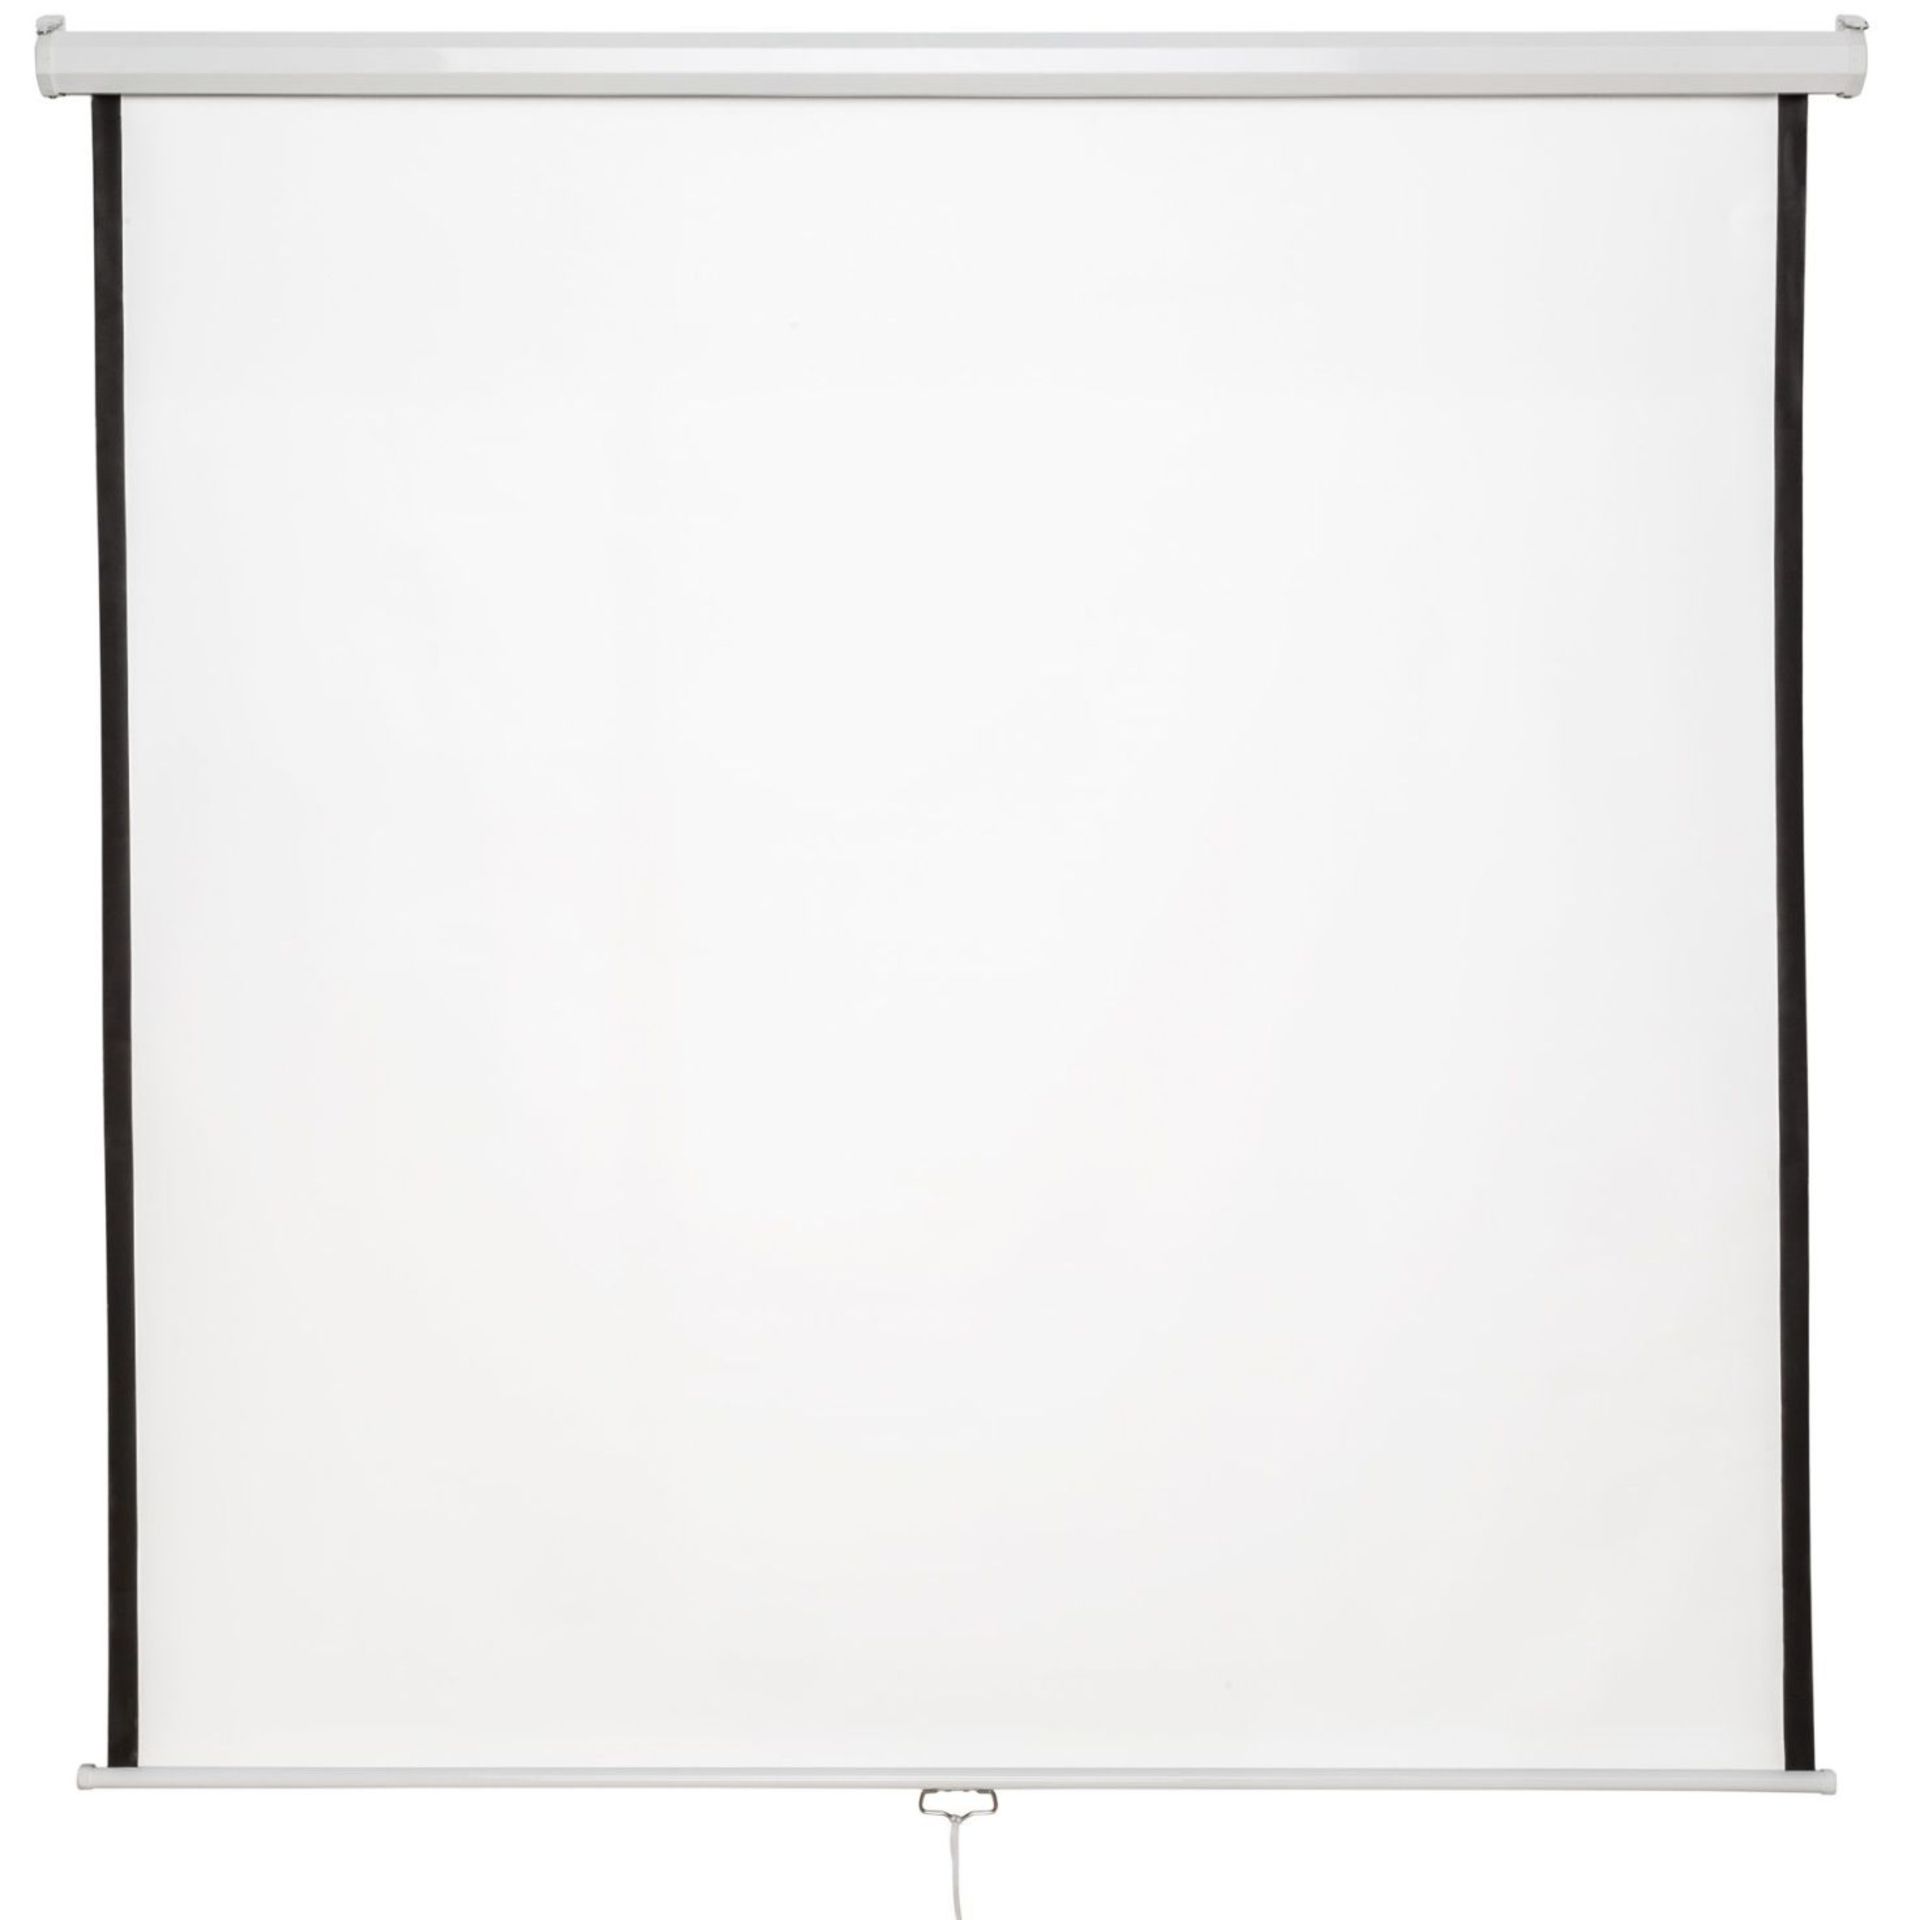 TecTake - Projector screen HDTV 152 x 152 cm - Boxed. RRP £47.99